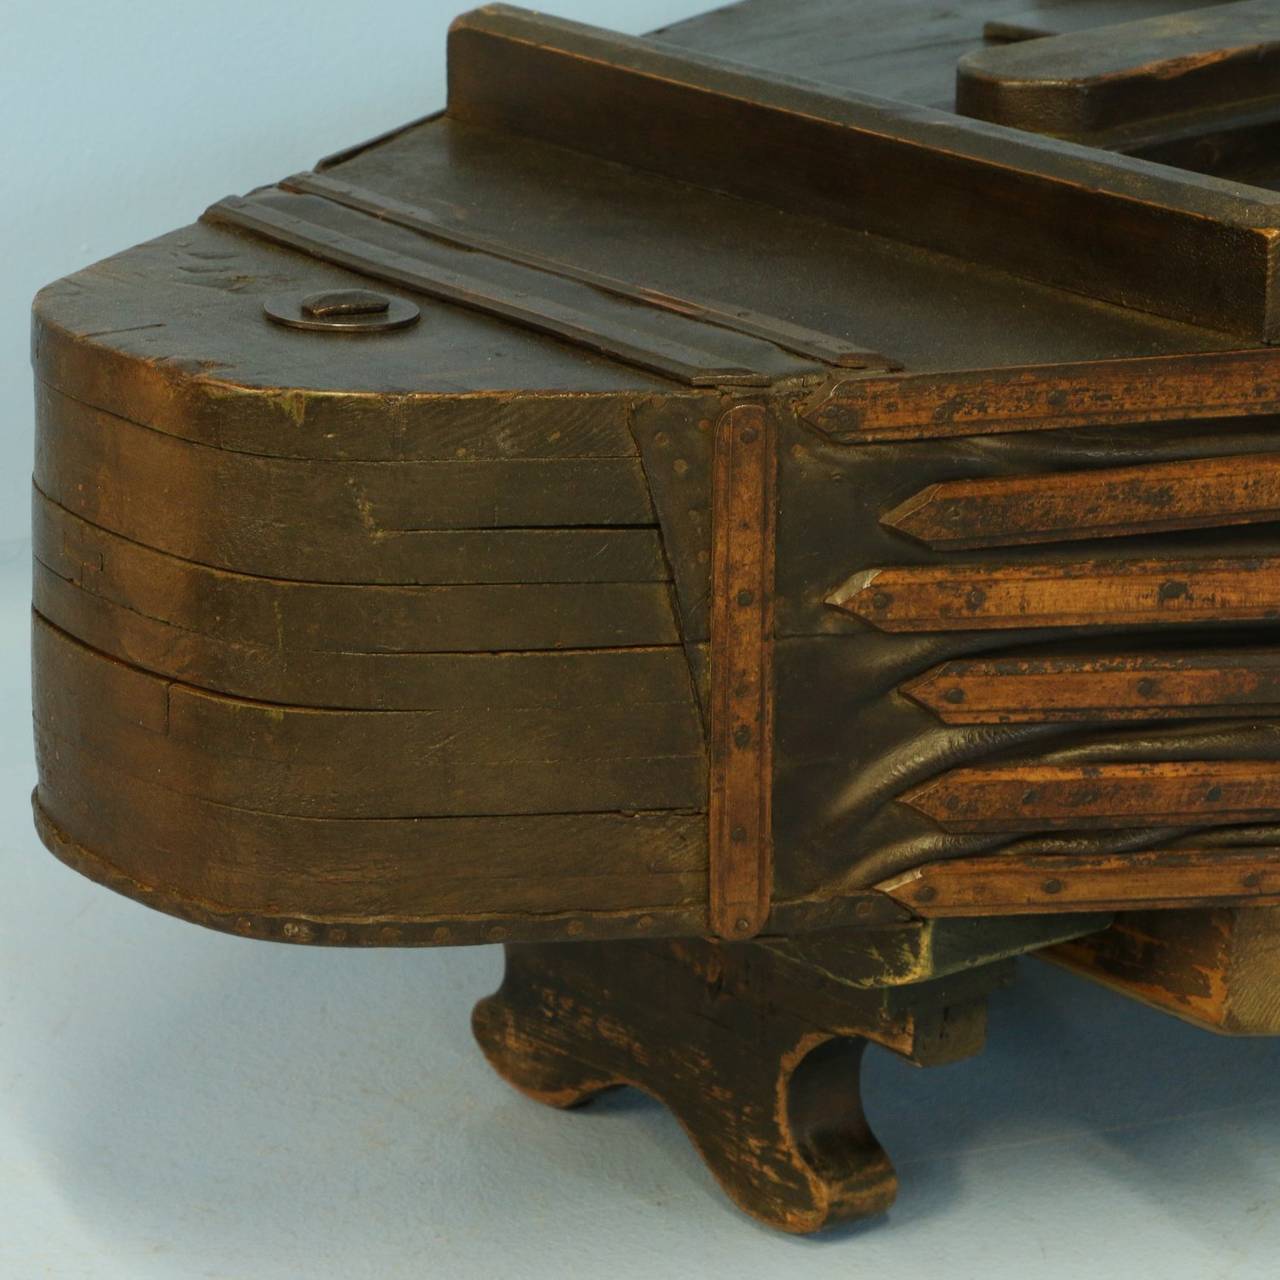 This coffee table is made from an original, large blacksmith bellows which was used throughout the 1800's. It has great charisma, with the conditioned leather, wrought iron details and the painted dark patina of the wood. The base was added to